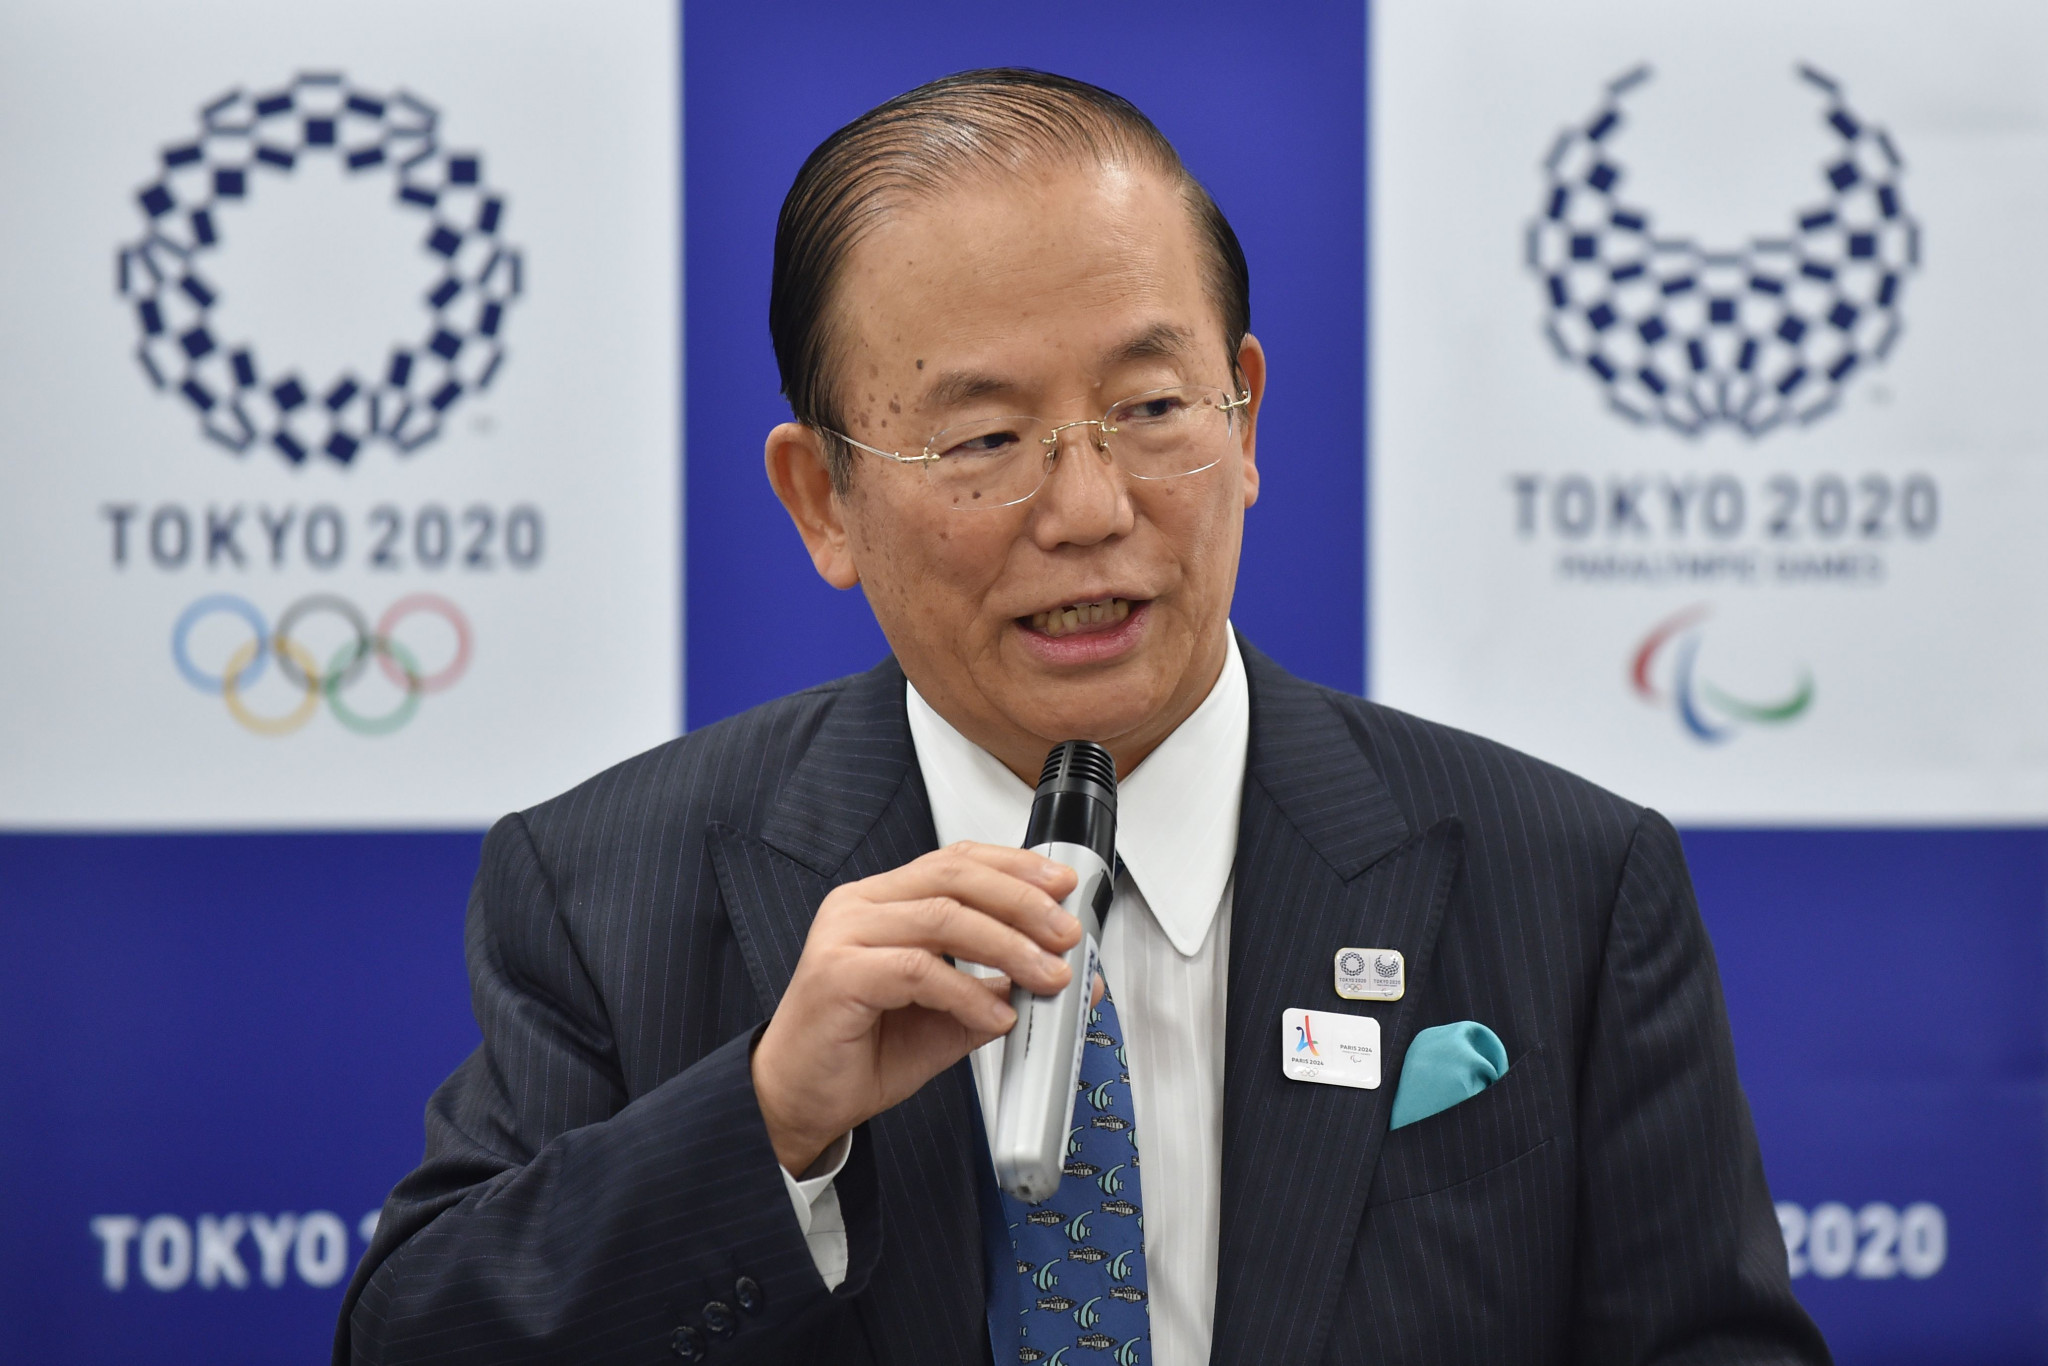 Tokyo 2020 chief executive Toshiro Muto said each volunteer was essential to the success of the Games ©Getty Images